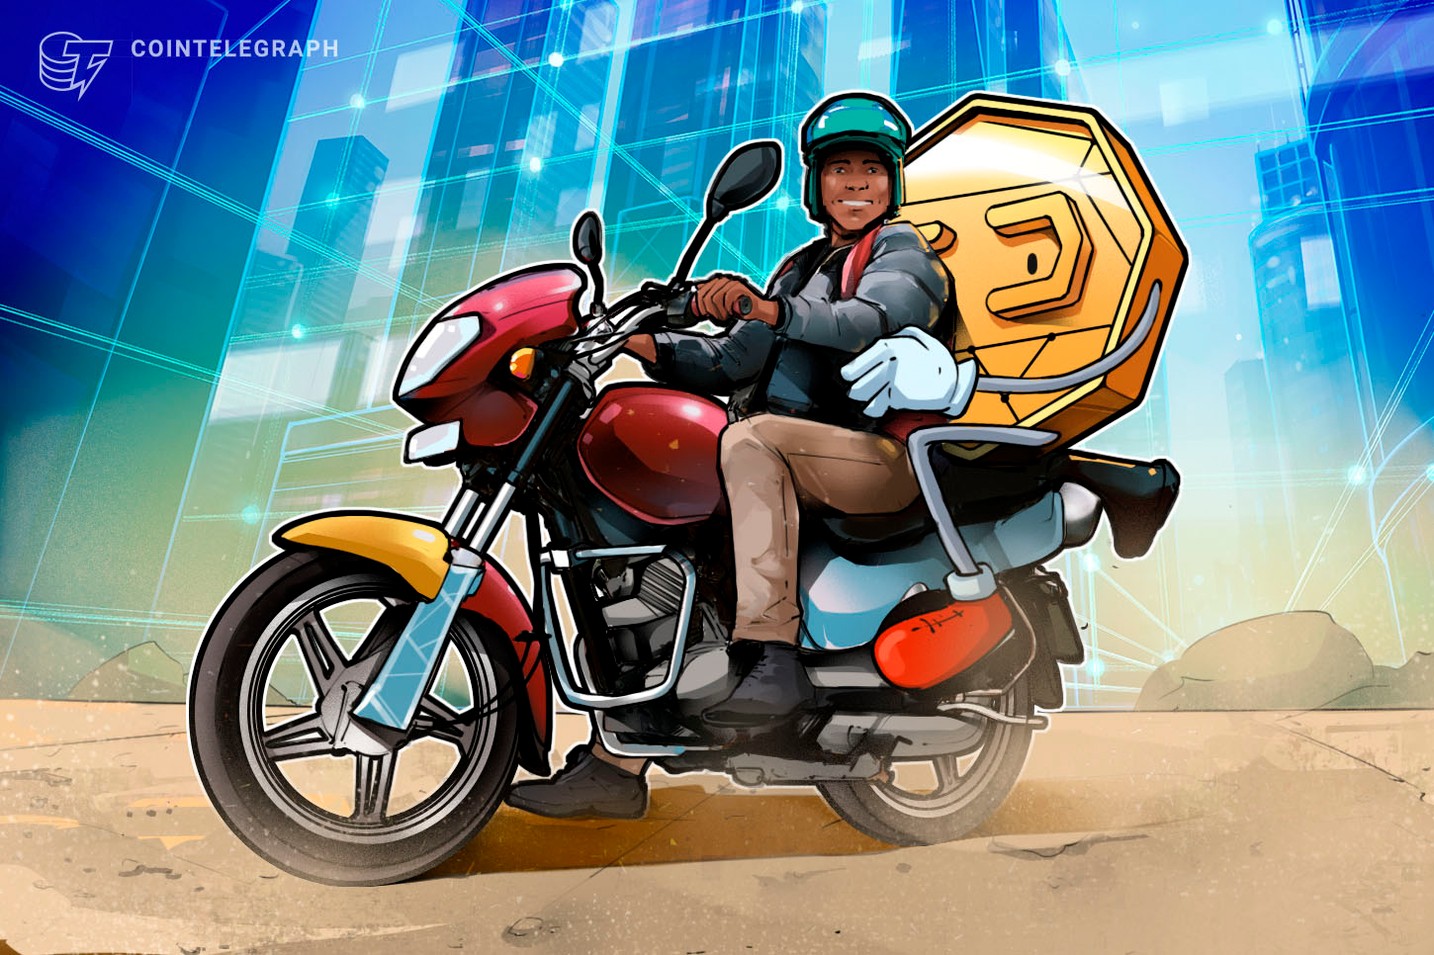 MetaMask enables direct crypto purchases in Nigeria